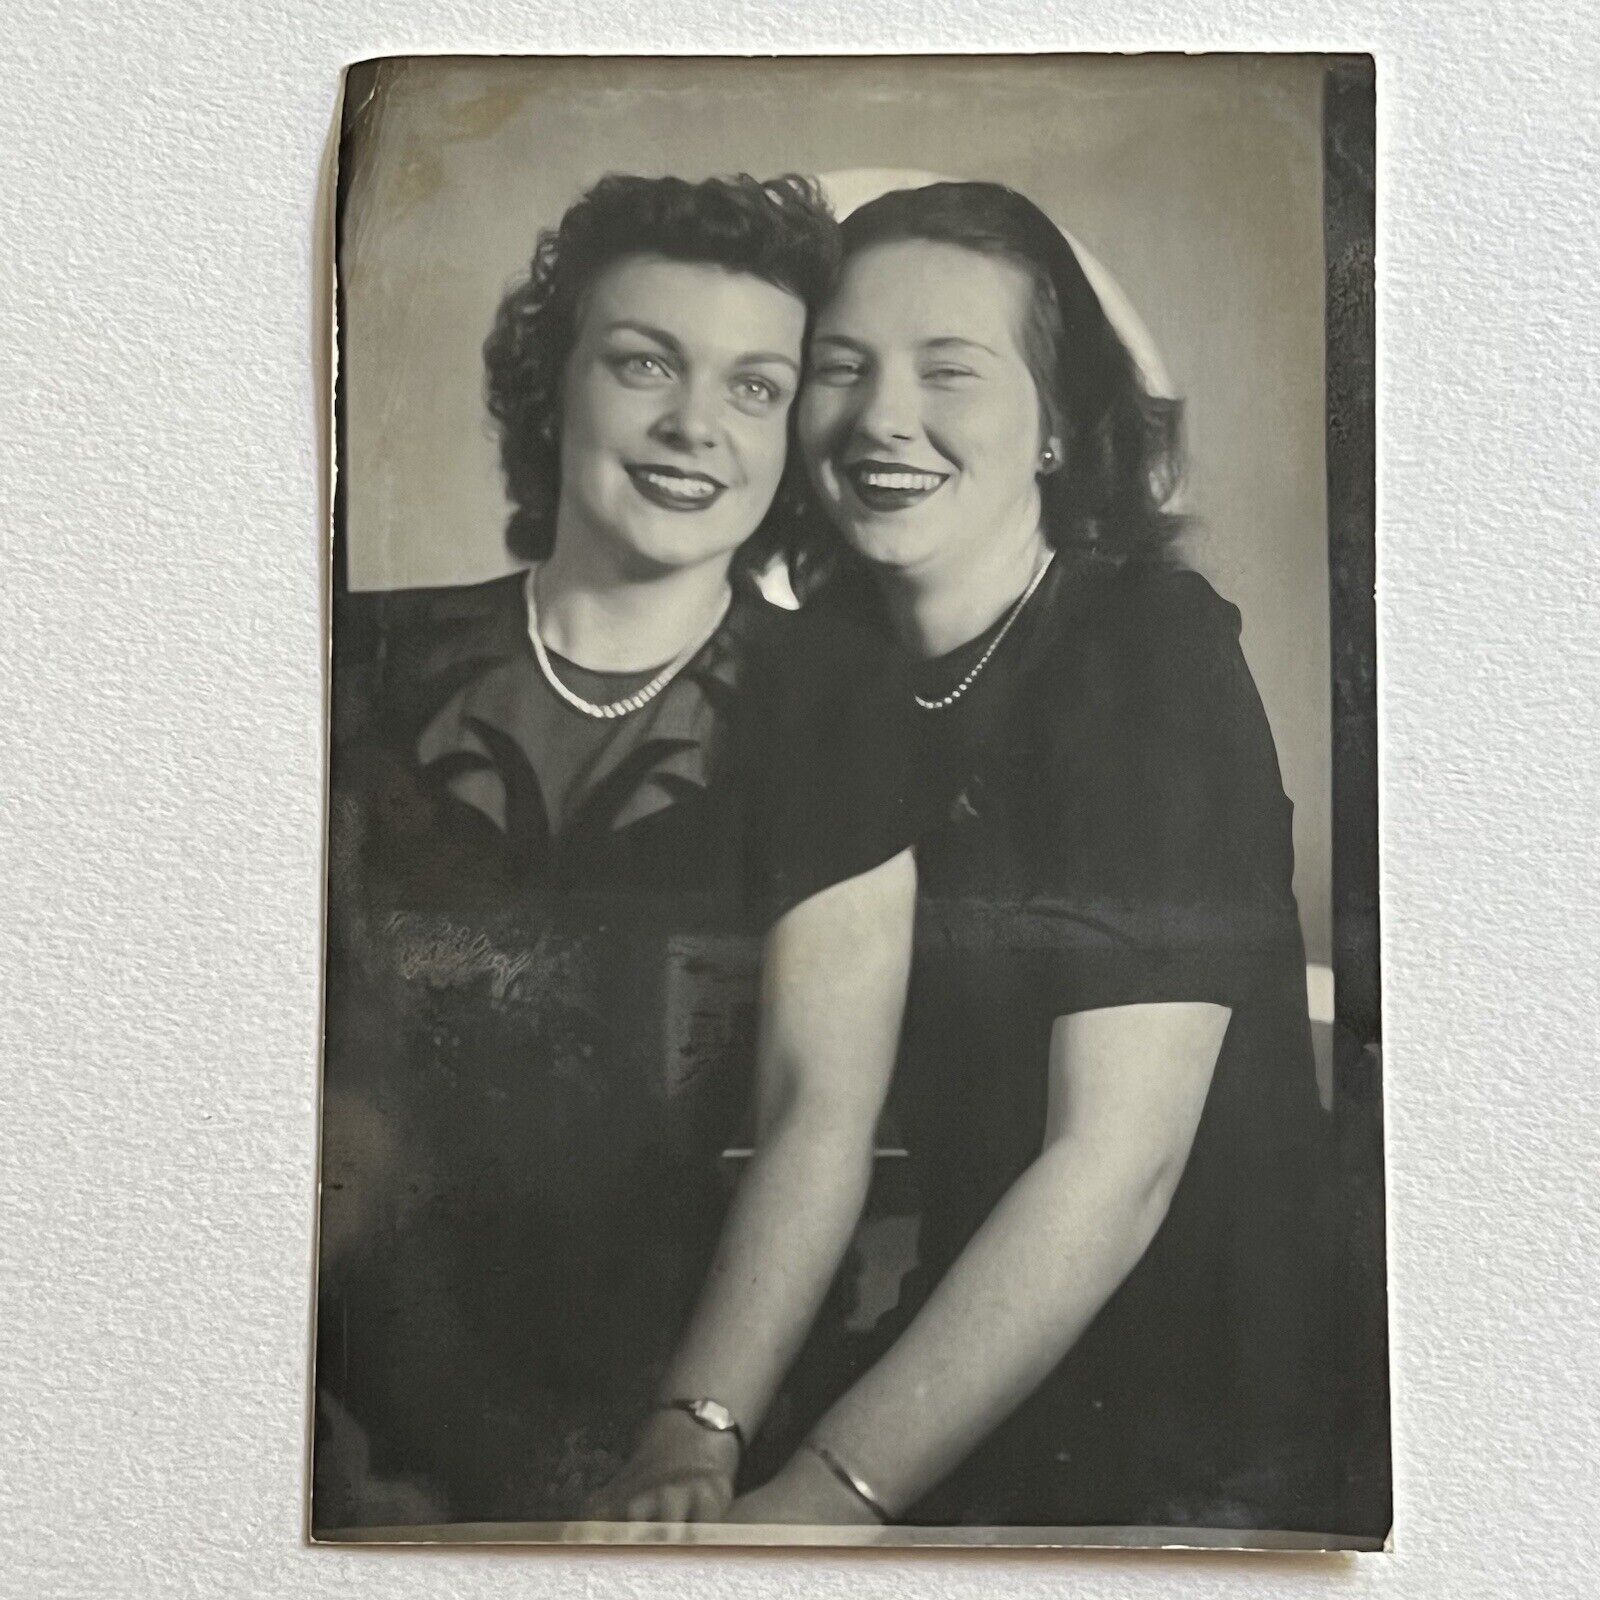 Vintage Big Photo Booth Photograph Beautiful Smiling Young Women Affectionate